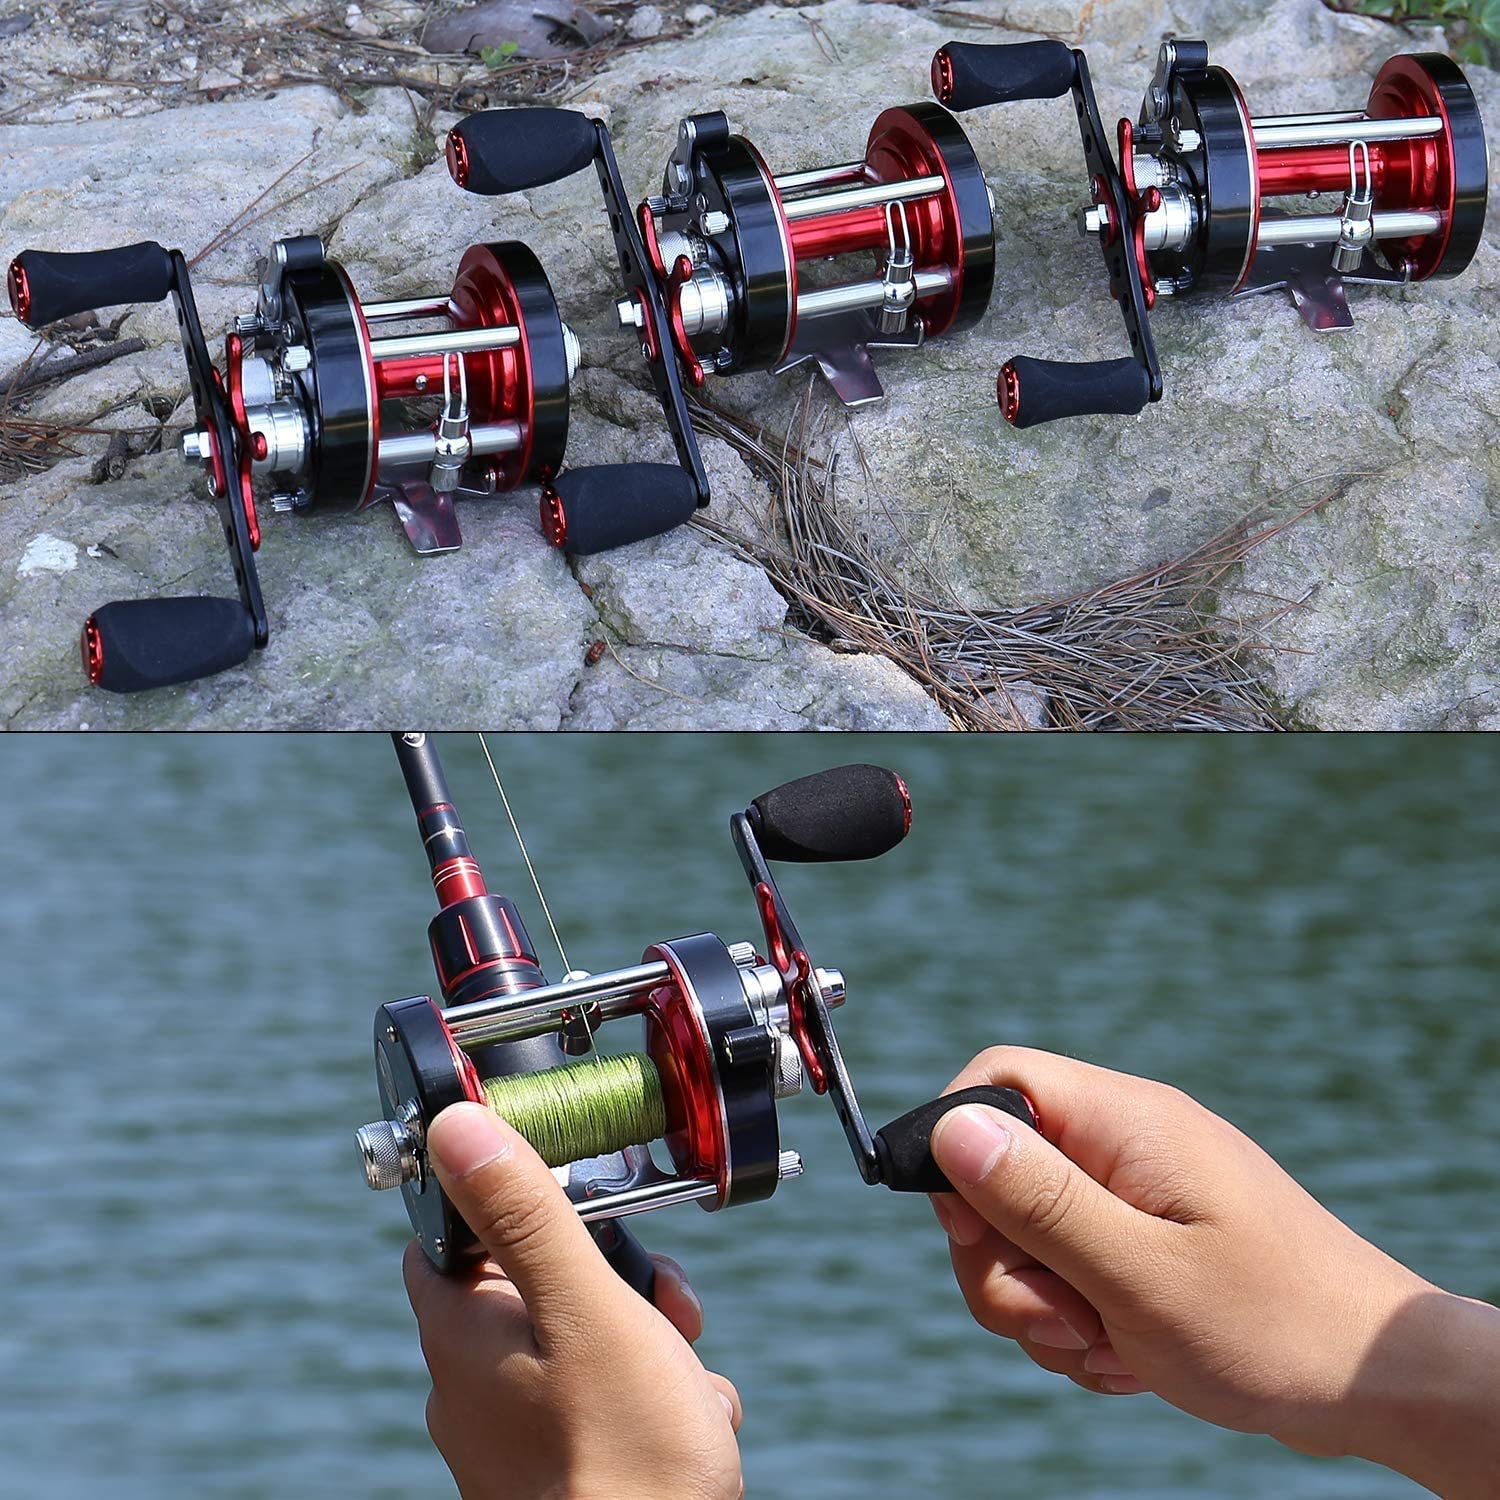 Sougayilang Round Baitcasting Reel Reinforced Metal Body EVA Left/Right Handle Conventional Fishing Reel - image 4 of 7